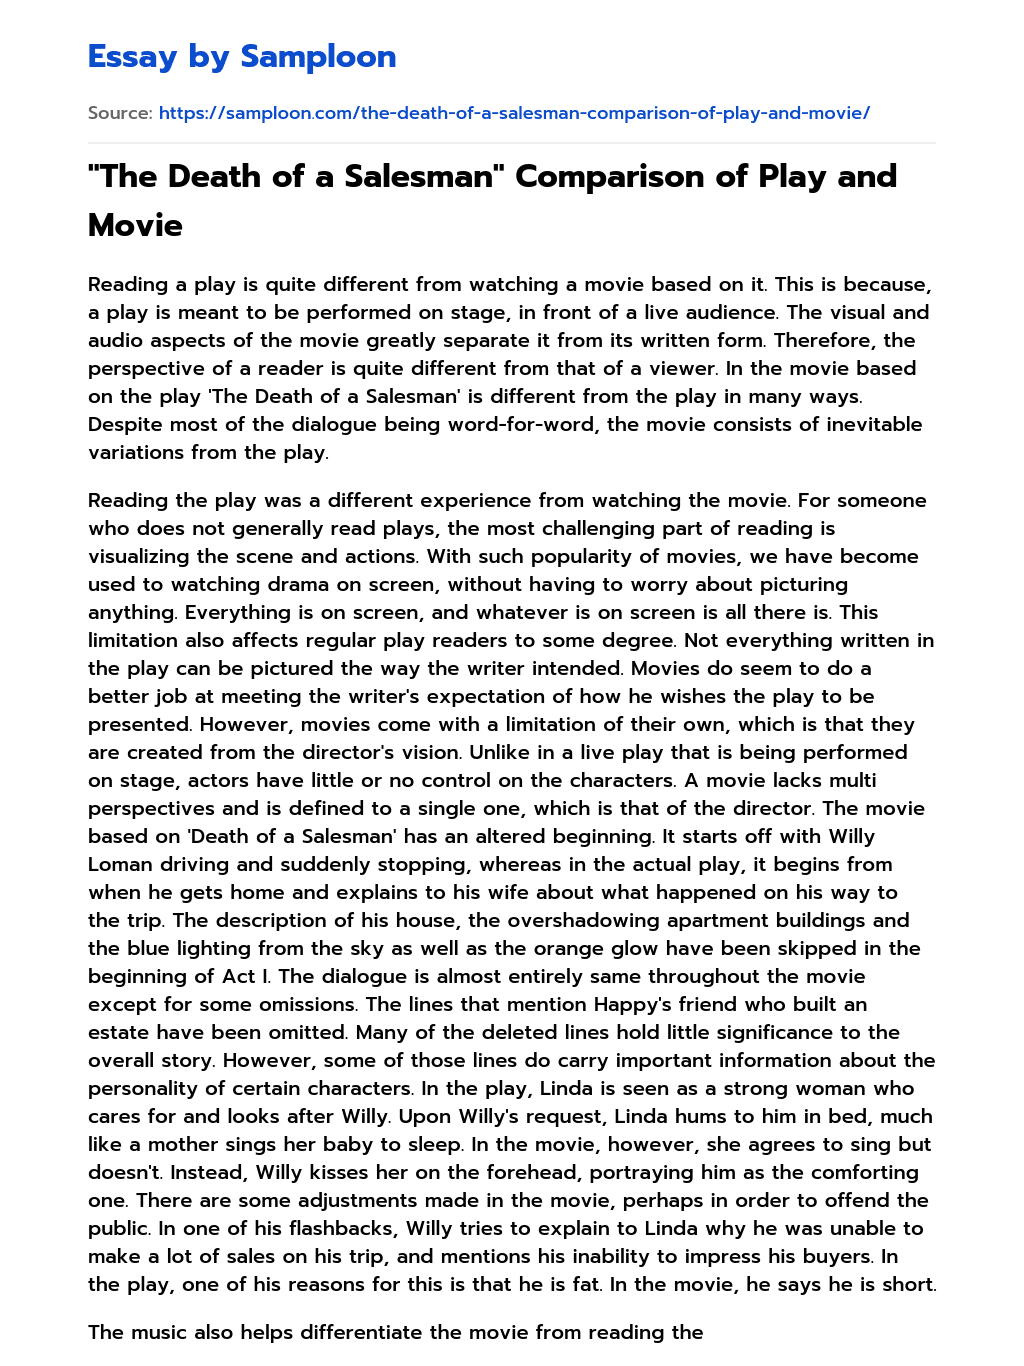 “The Death of a Salesman” Comparison of Play and Movie essay